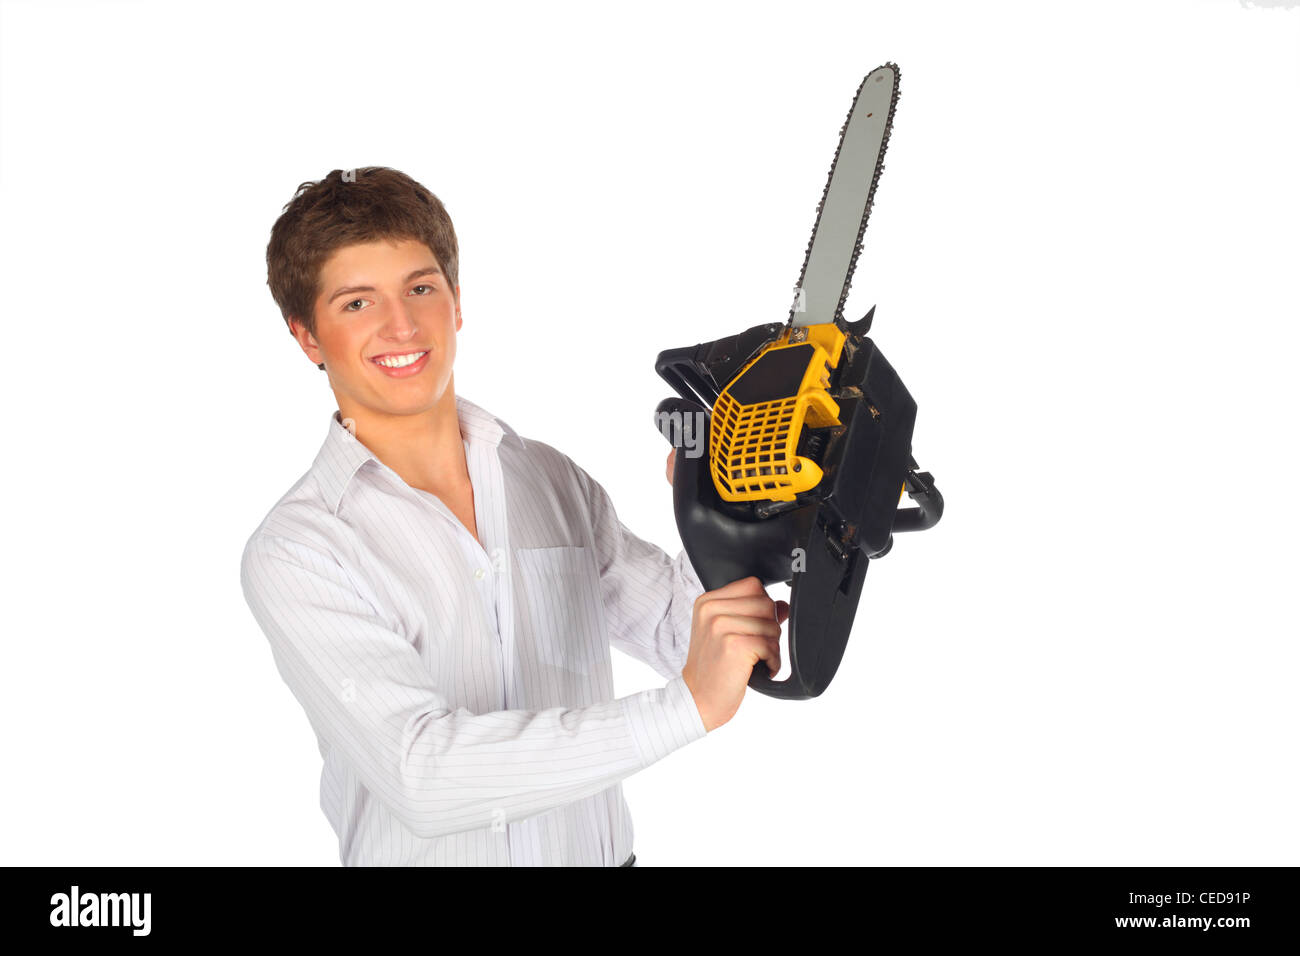 Young man shows chainsaw Stock Photo